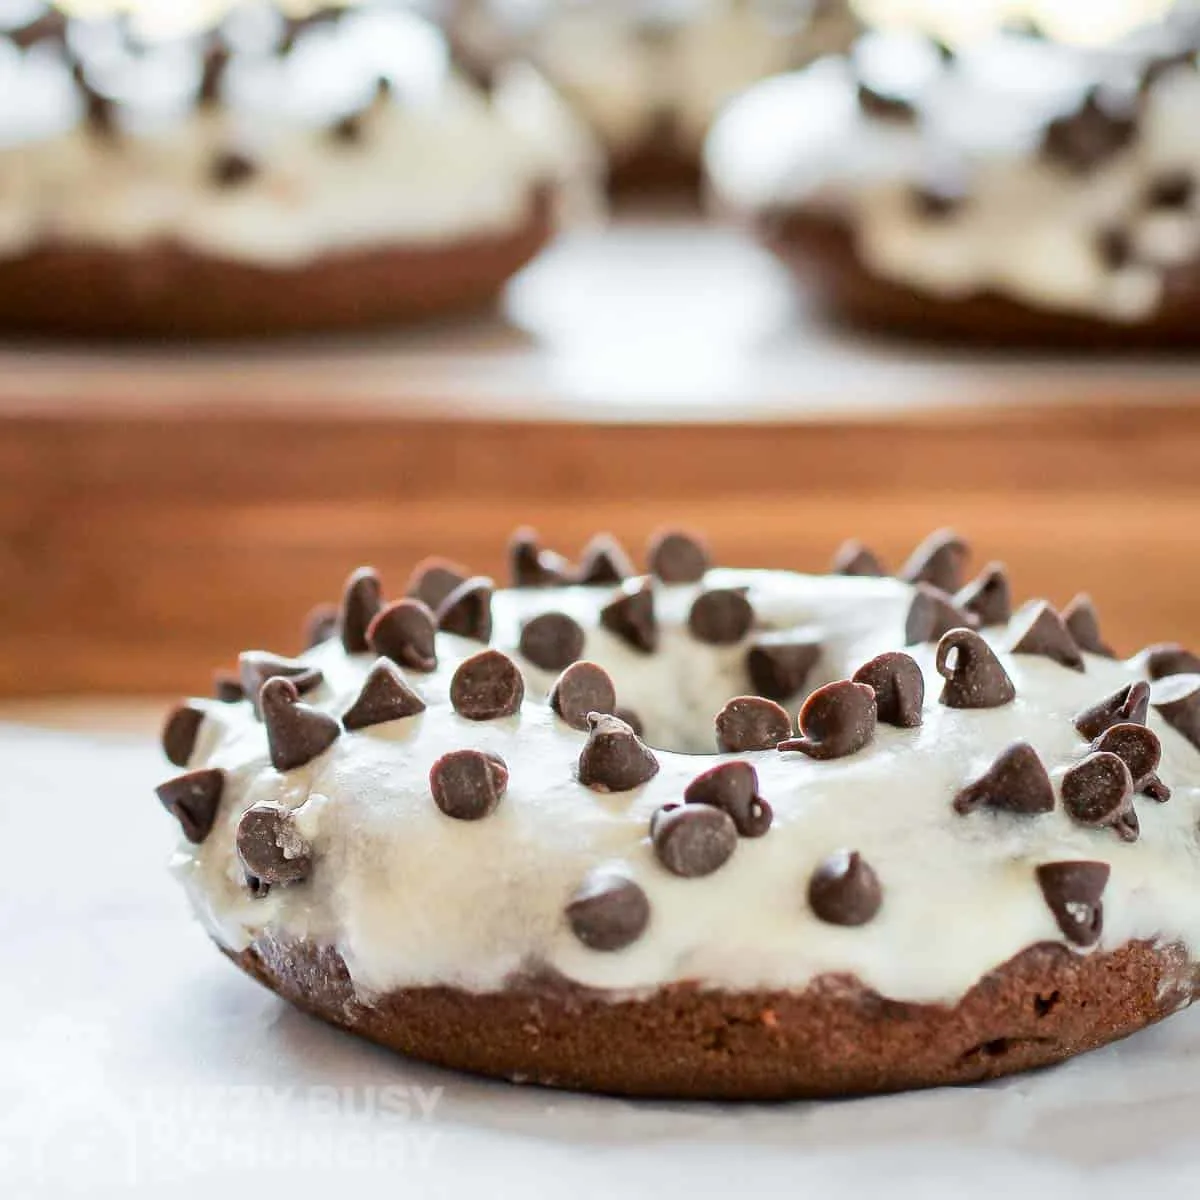 baked chocolate doughnuts with orange glaze feature